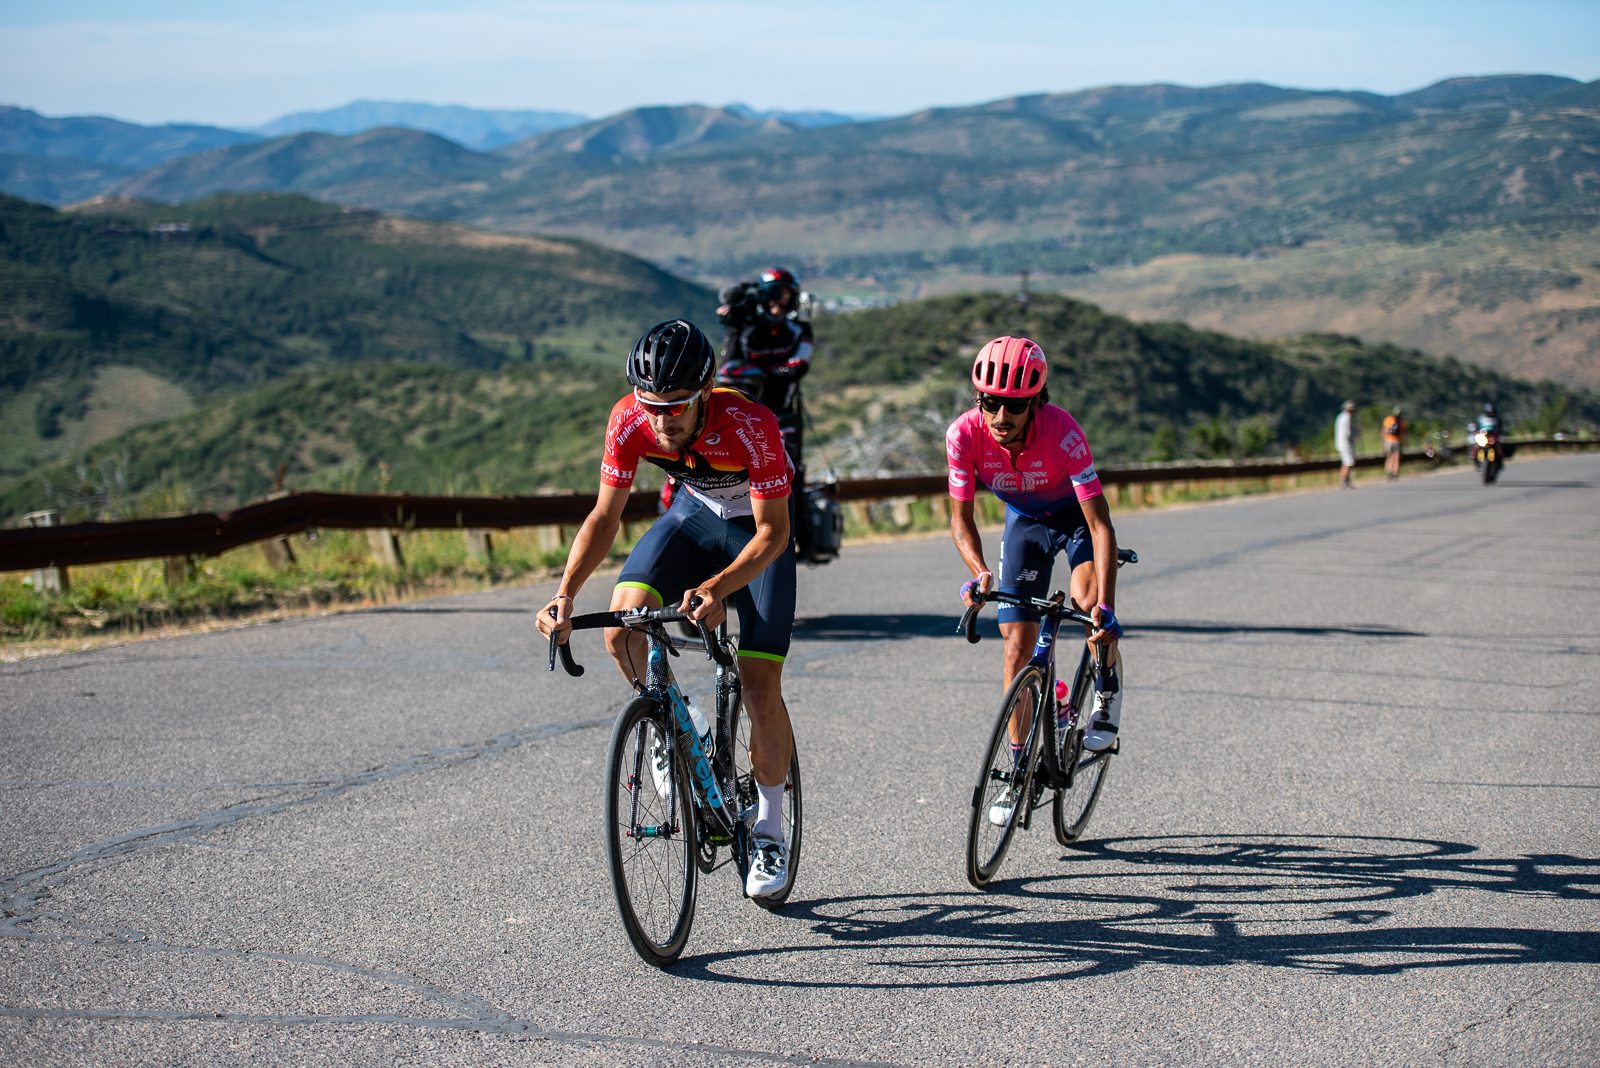 Hayden McCormick (Team BridgeLane) & Lachlan Morton (EF Education First) nearing the top of the final KOM at Olympic Park. Stage 5, 2019 Tour of Utah. Photo by Steven L. Sheffield